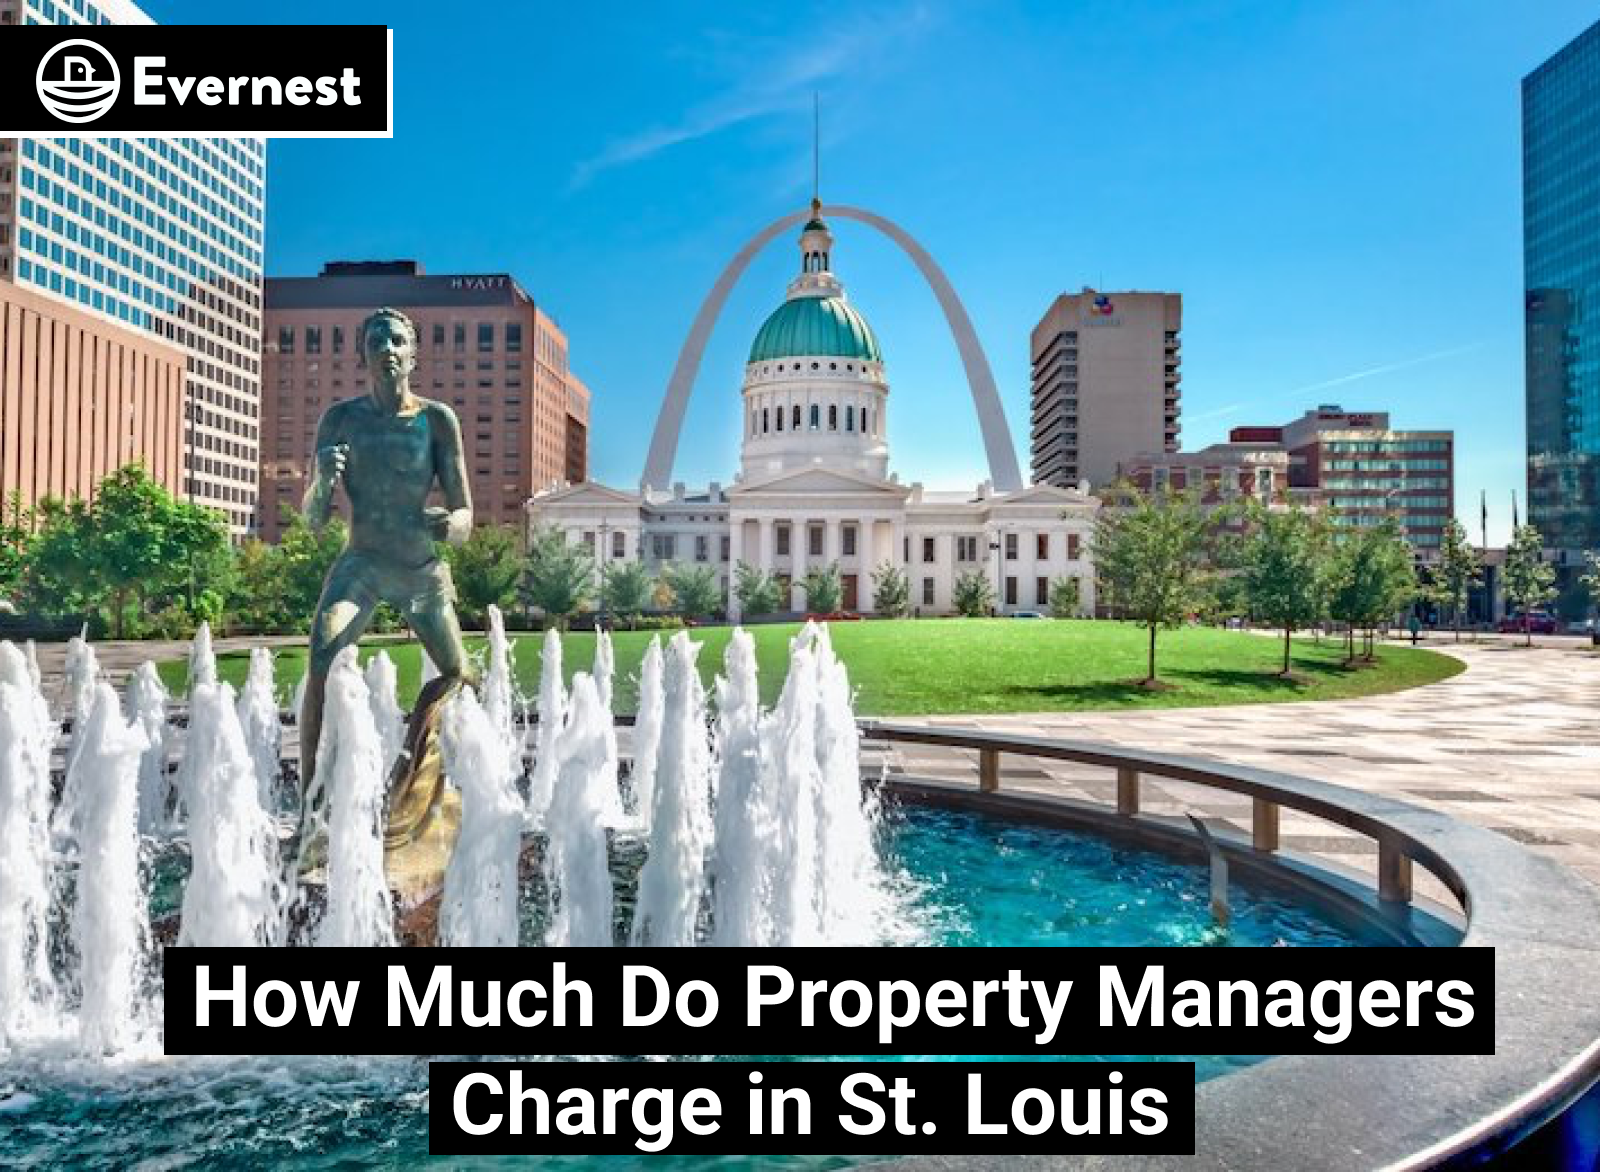 How Much Do Property Managers Charge in St. Louis